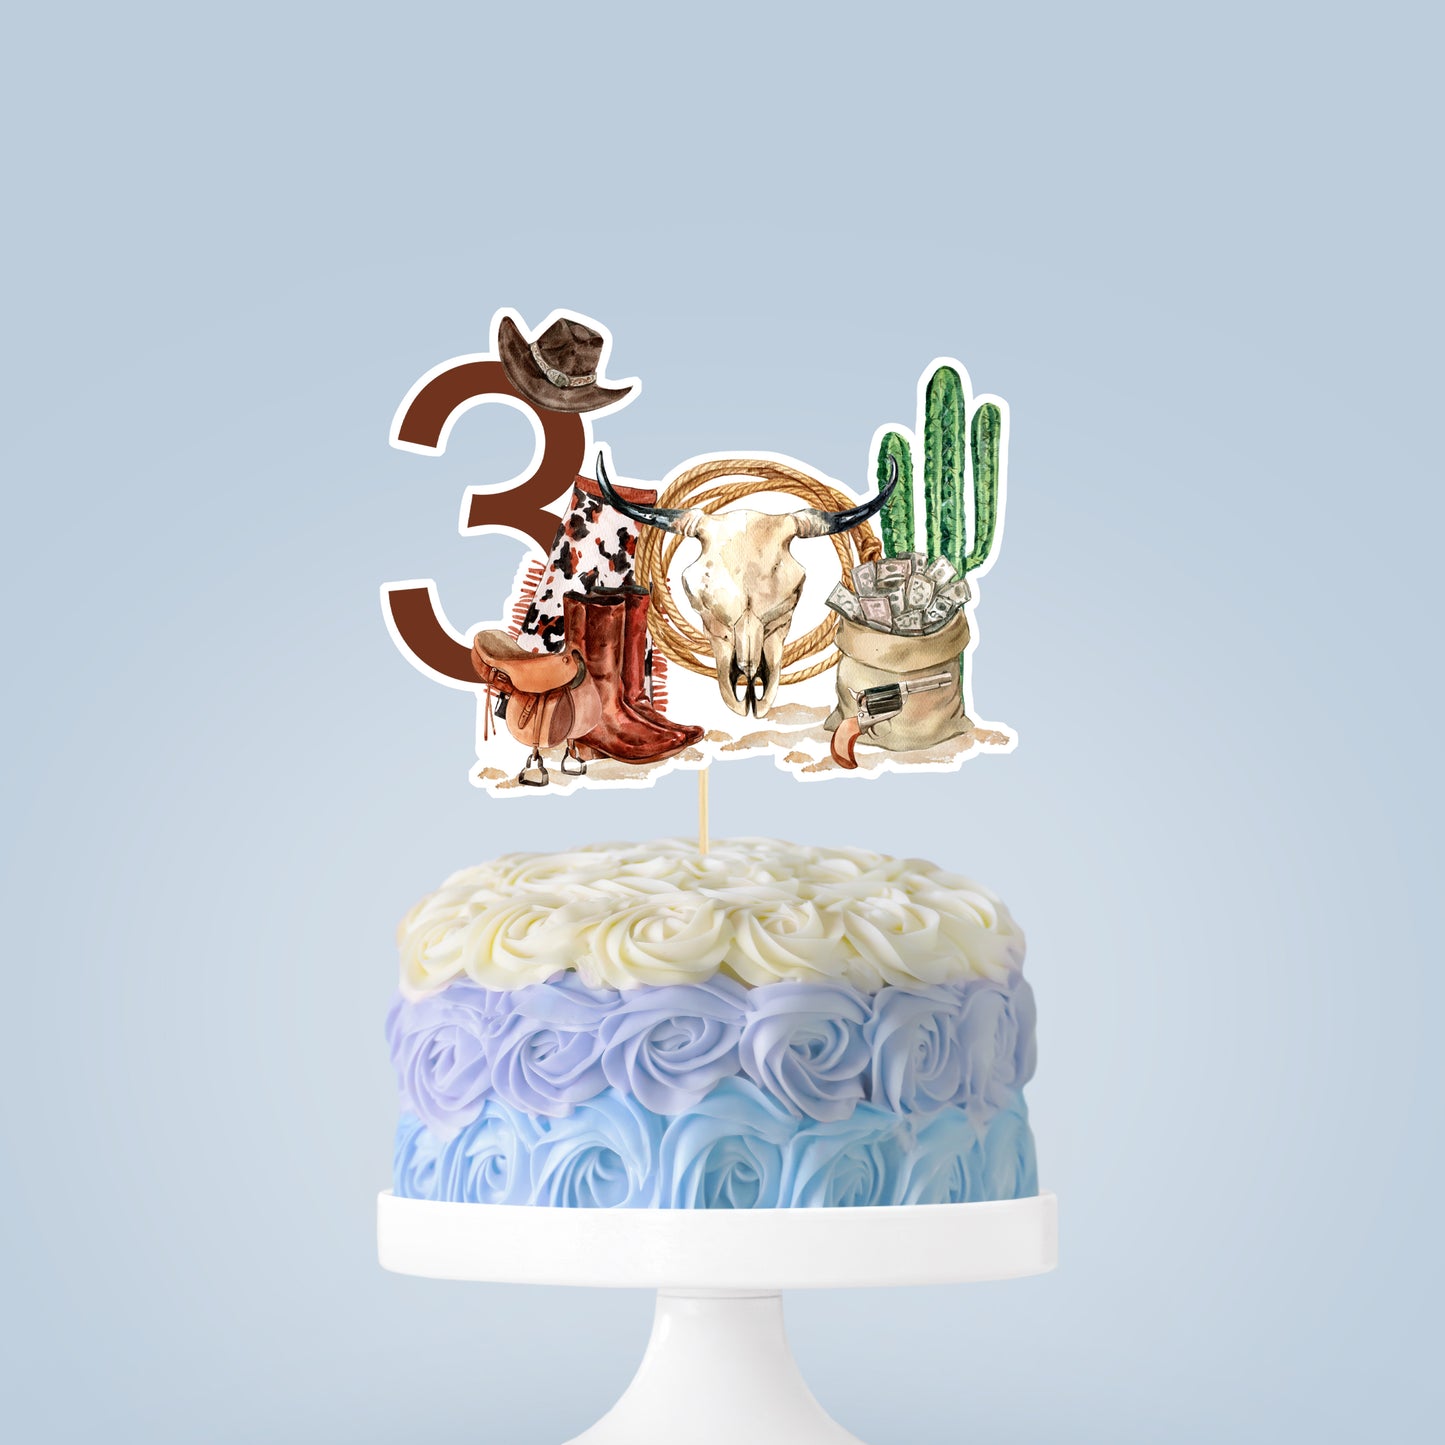 Rodeo Cake topper 3rd birthday | Cowboy Party Decorations - 34A